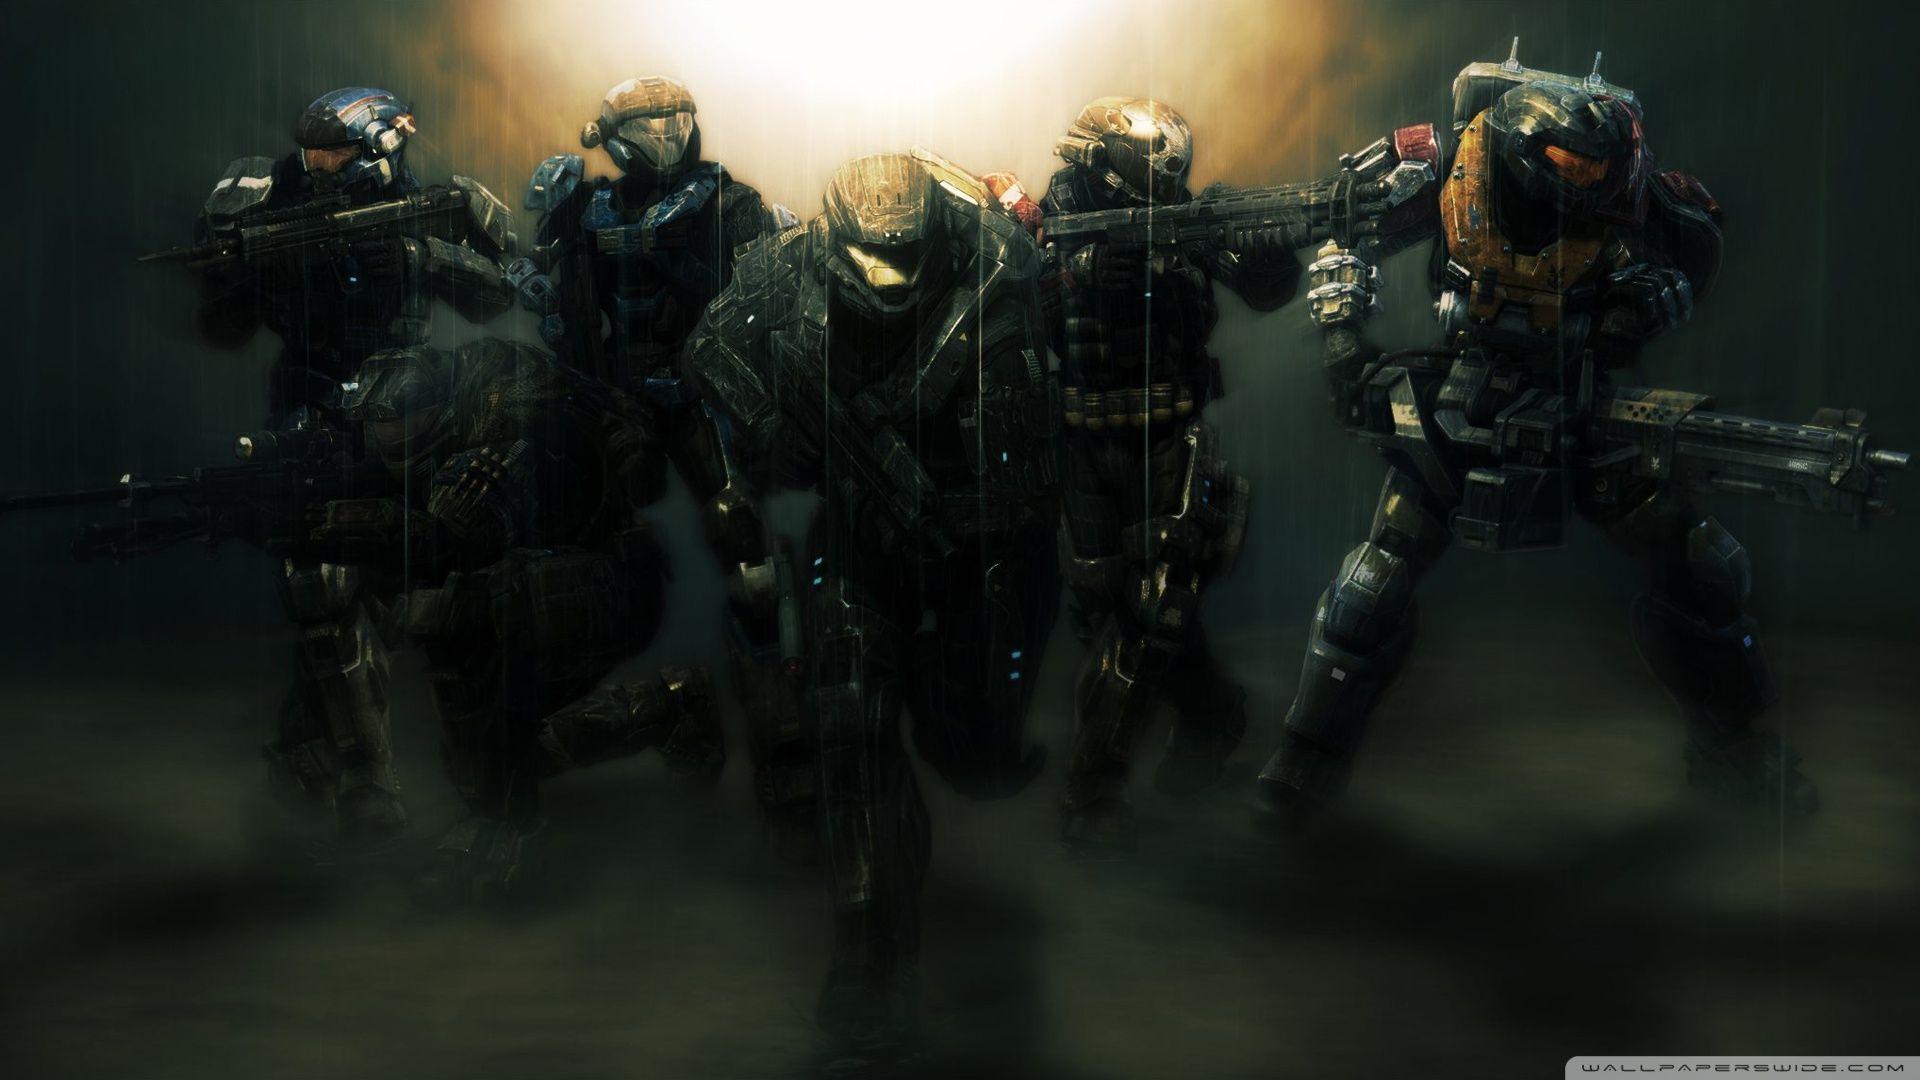 Halo Reach Wallpapers 1080p Wallpaper Cave